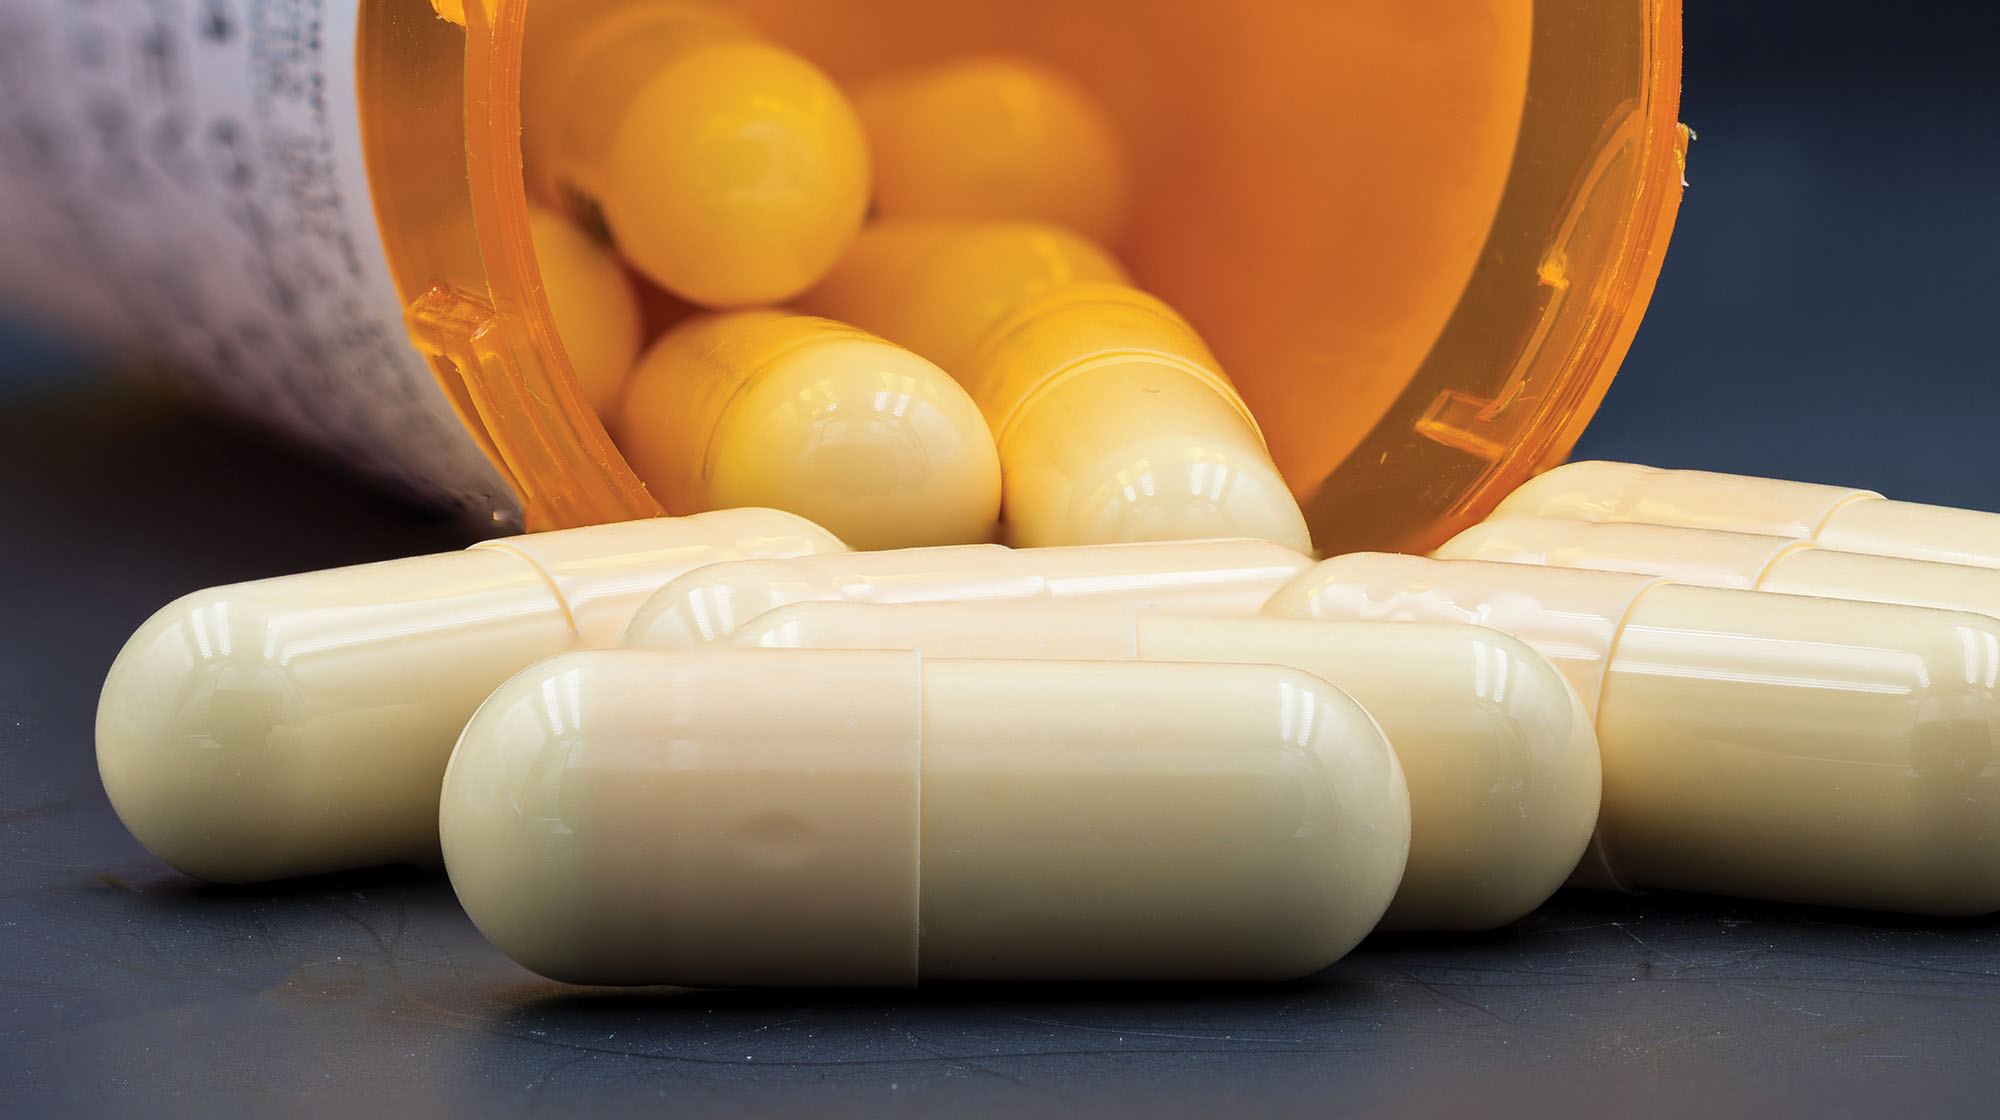 Pill capsules in front of a bottle.